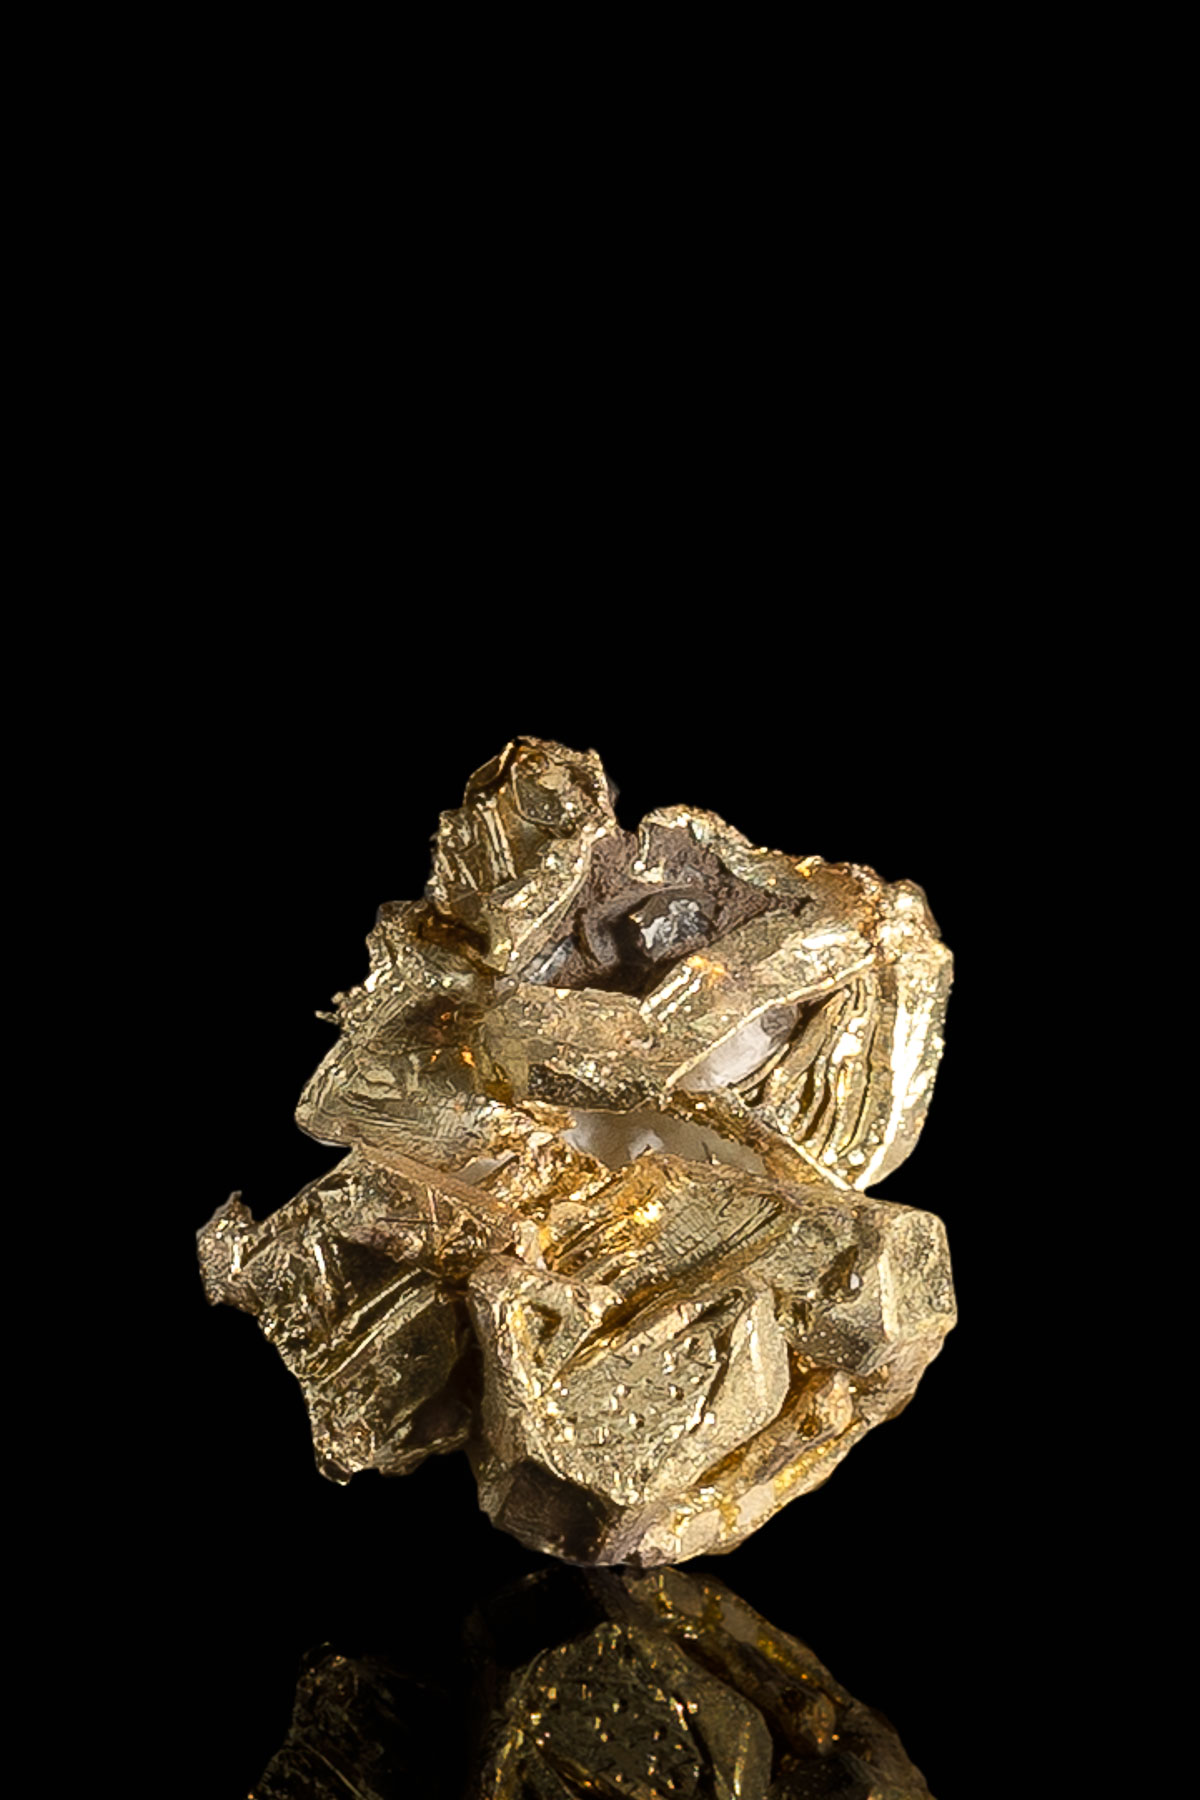 Outstanding Gold Crystal - Round Mountain Gold Mine